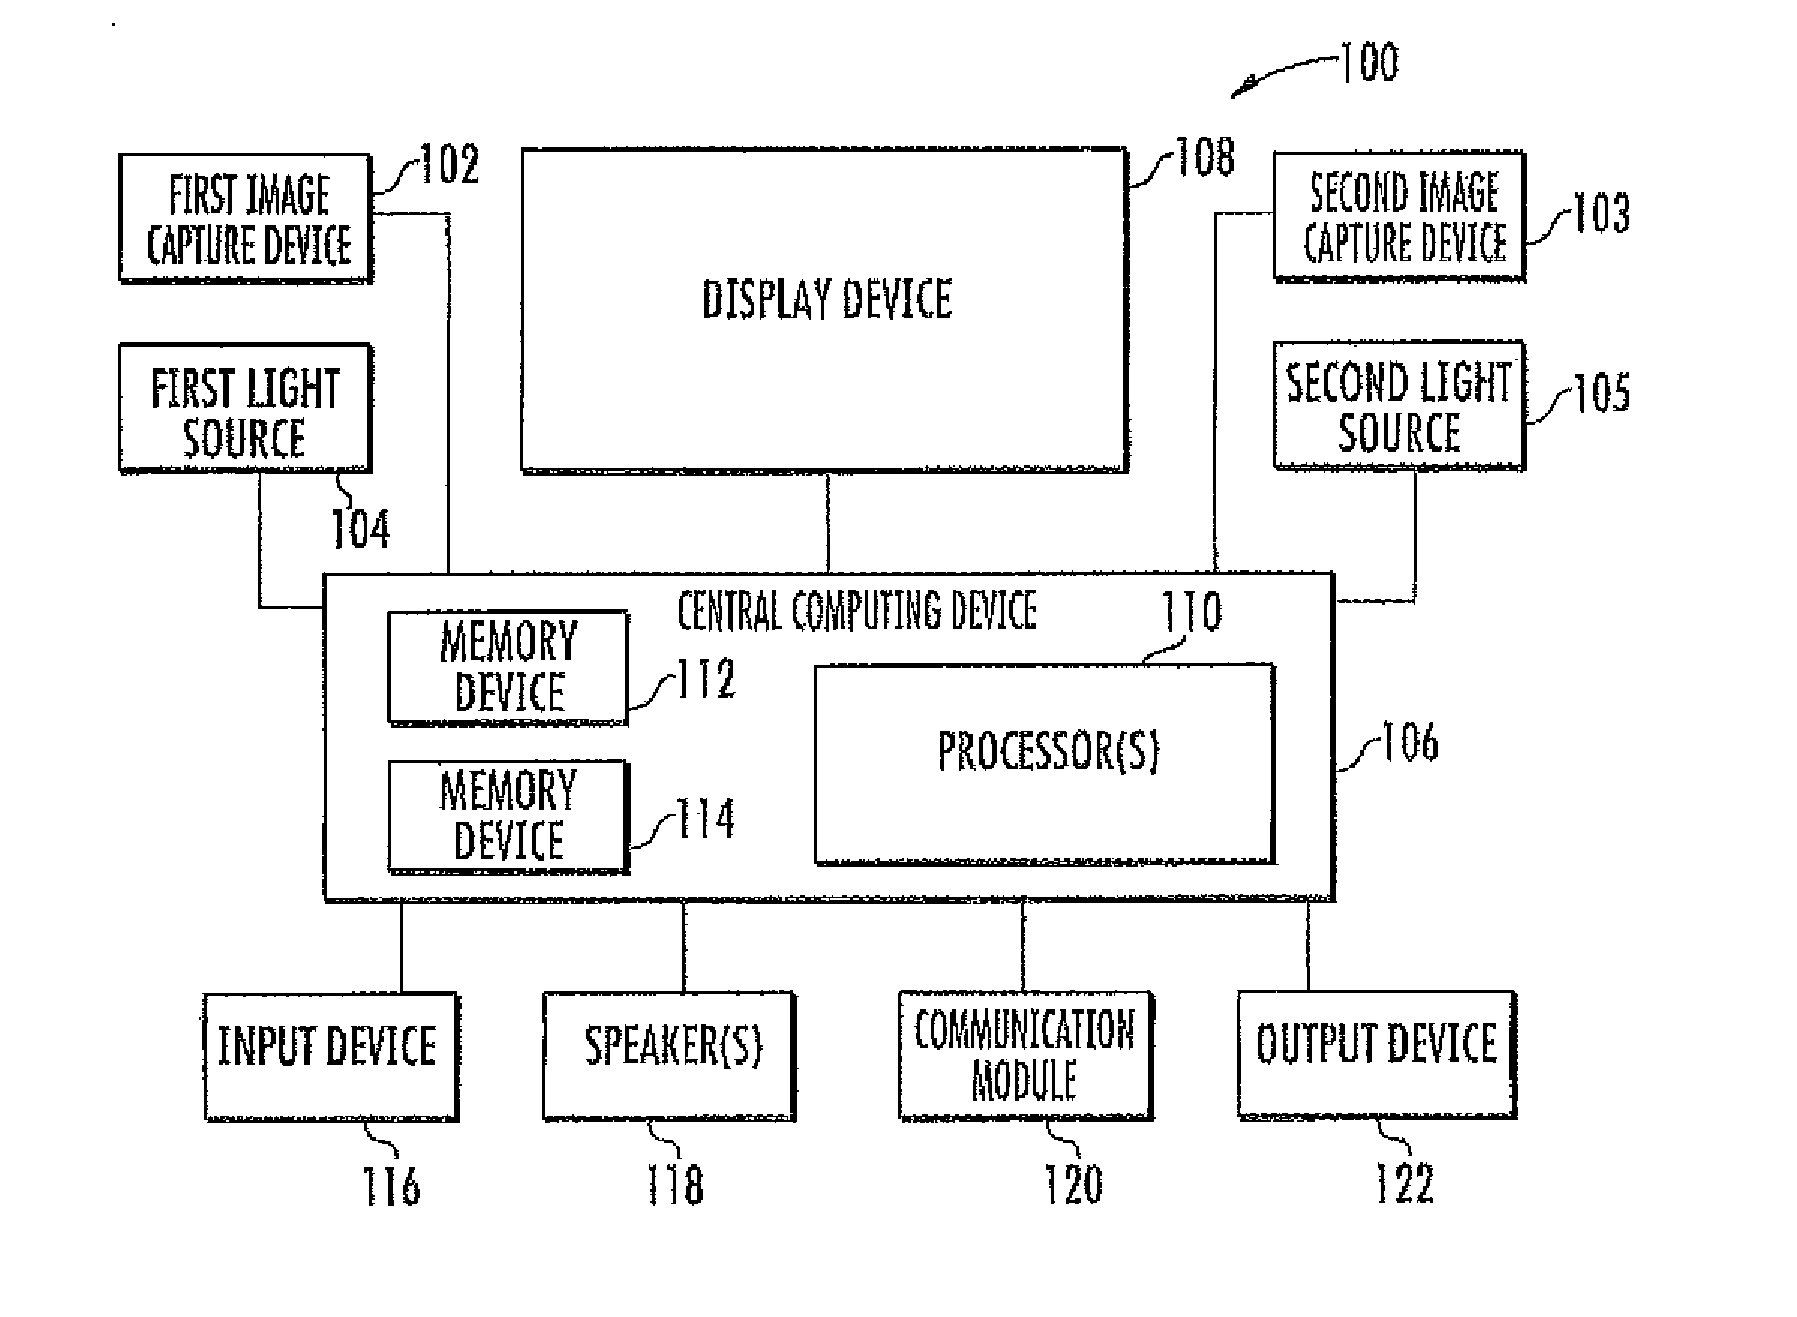 Calibration free, motion tolerant eye-gaze direction detector with contextually aware computer interaction and communication methods